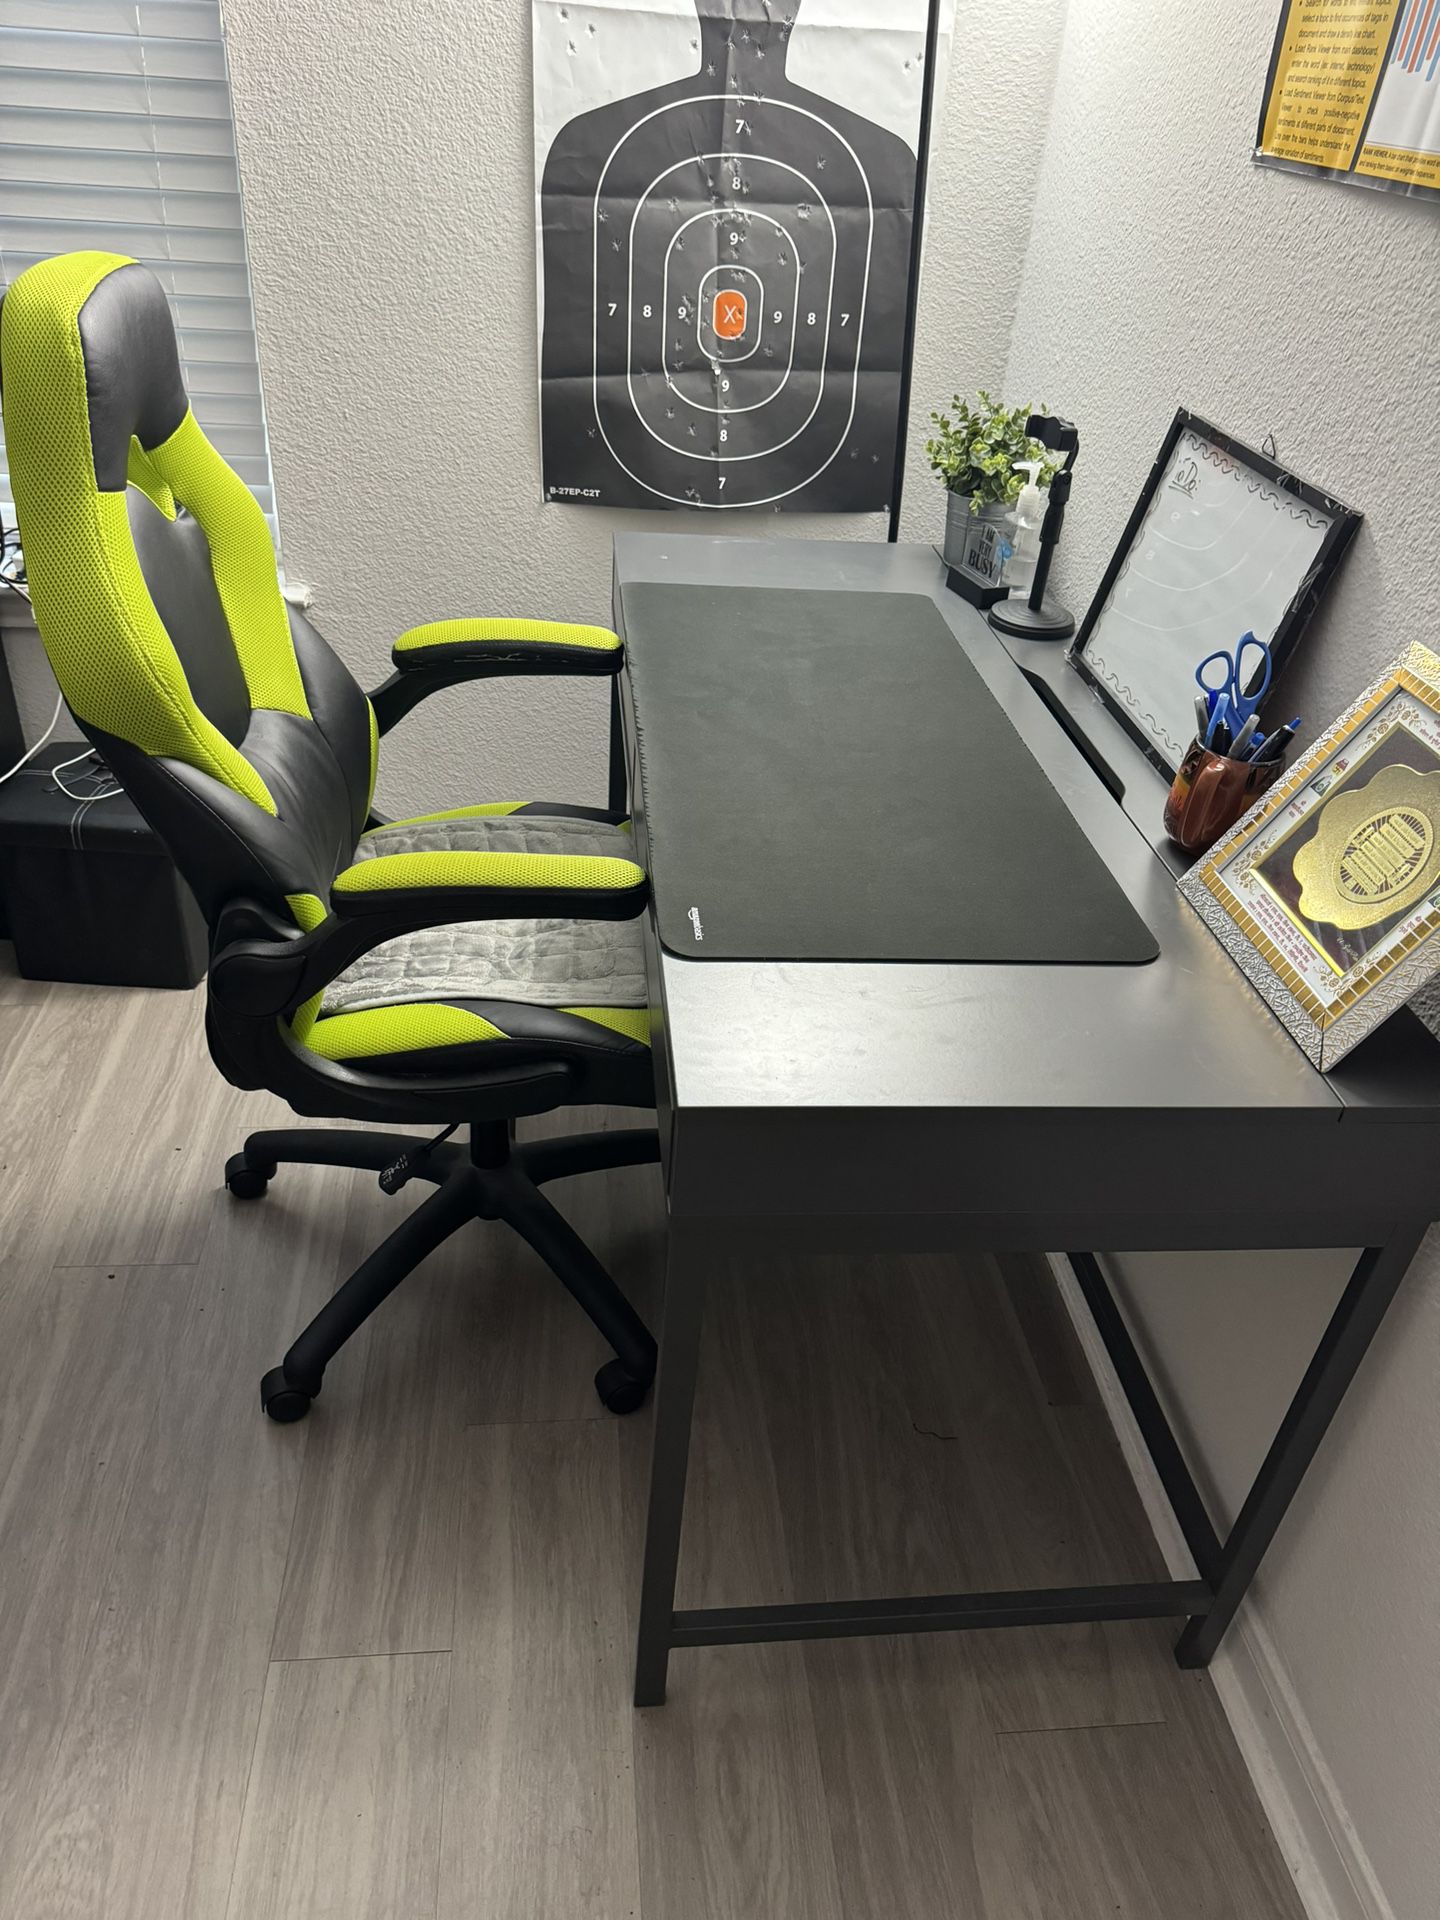 IKEA Computer / Study Desk With Gaming Chair